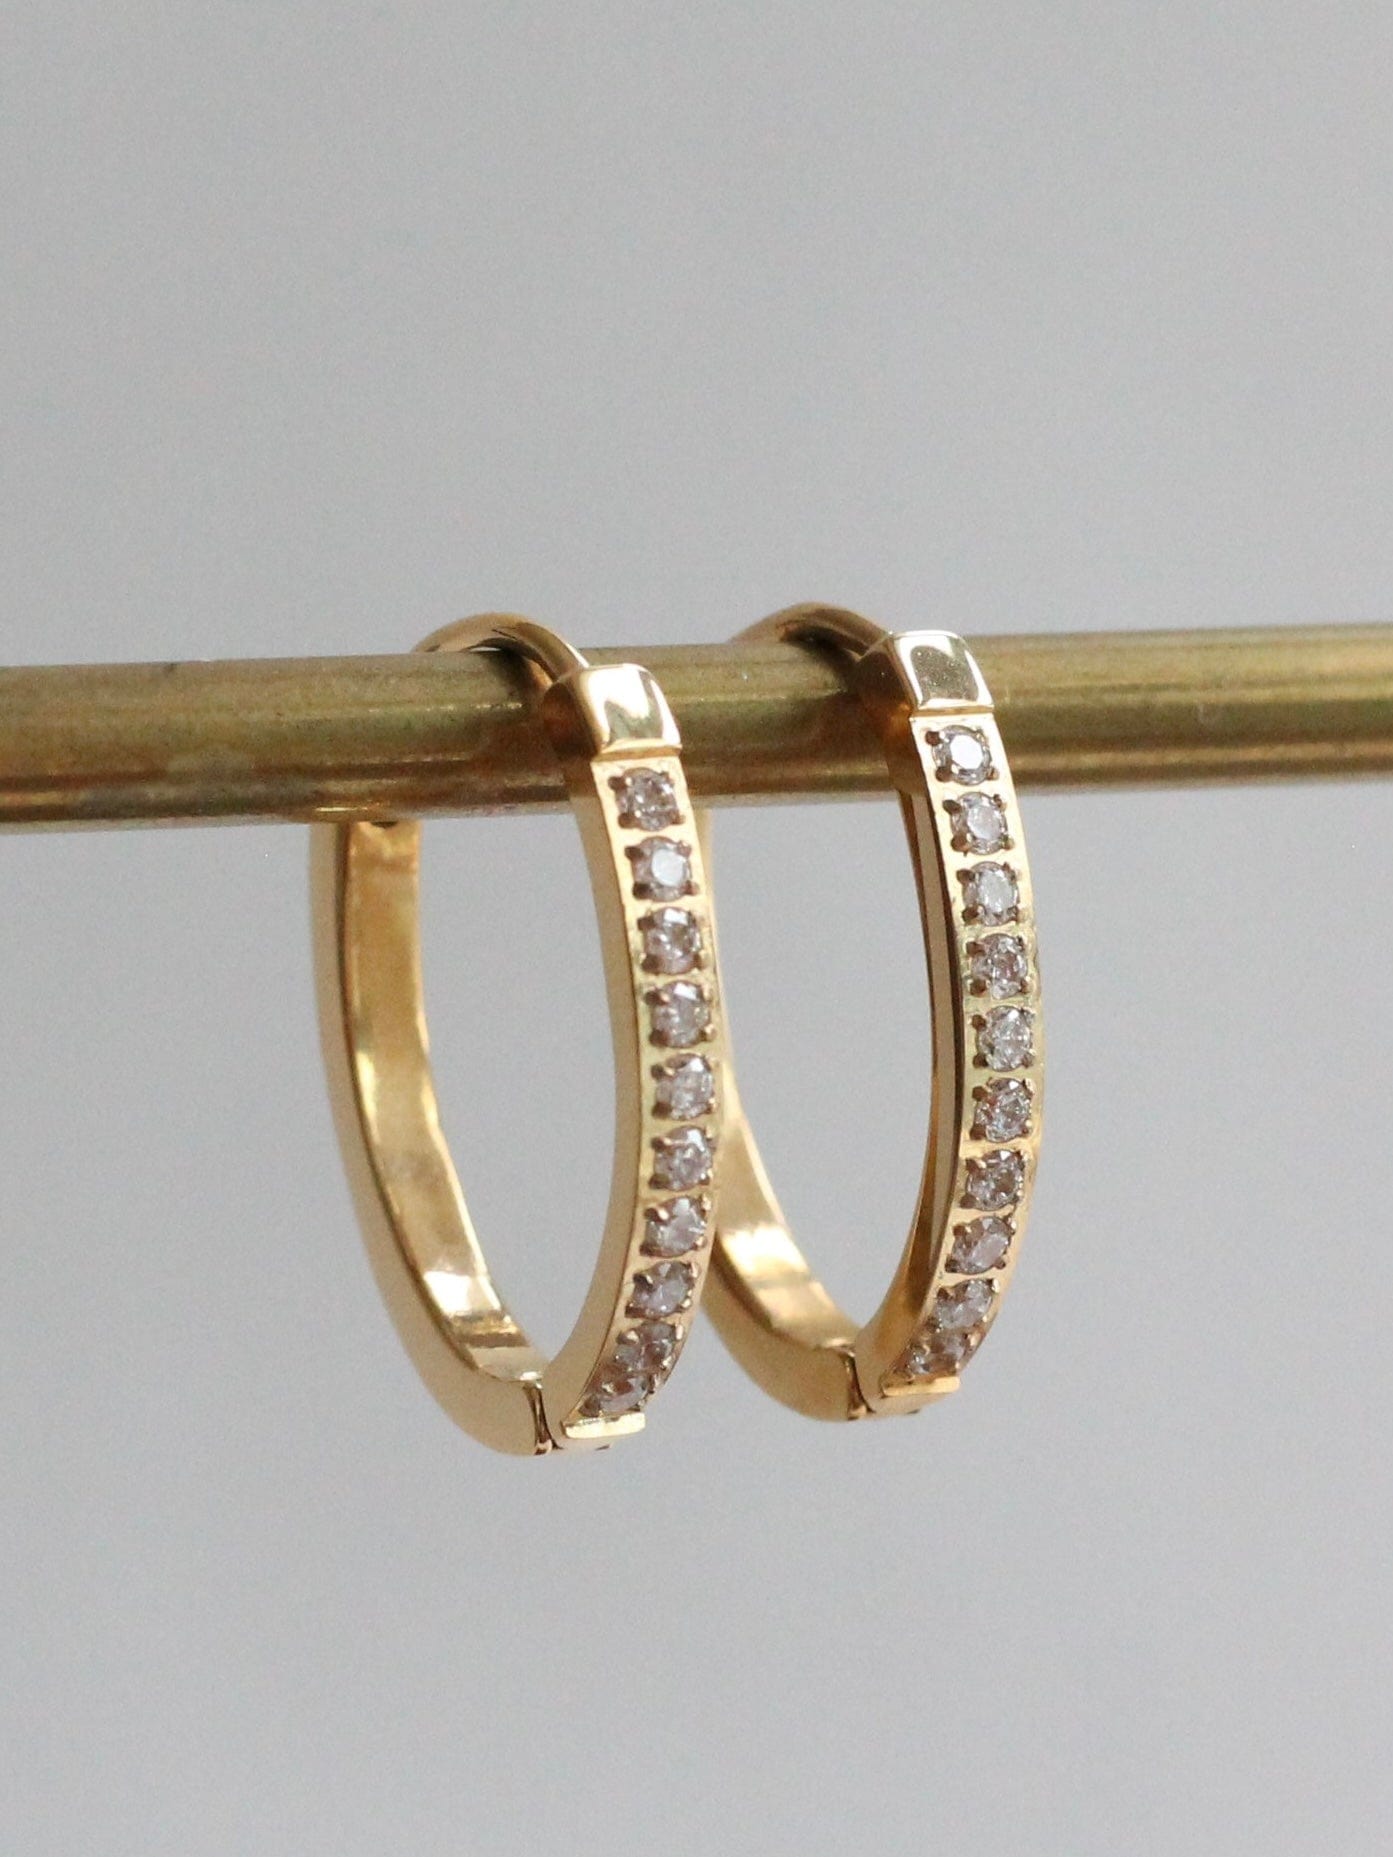 Pave hoops